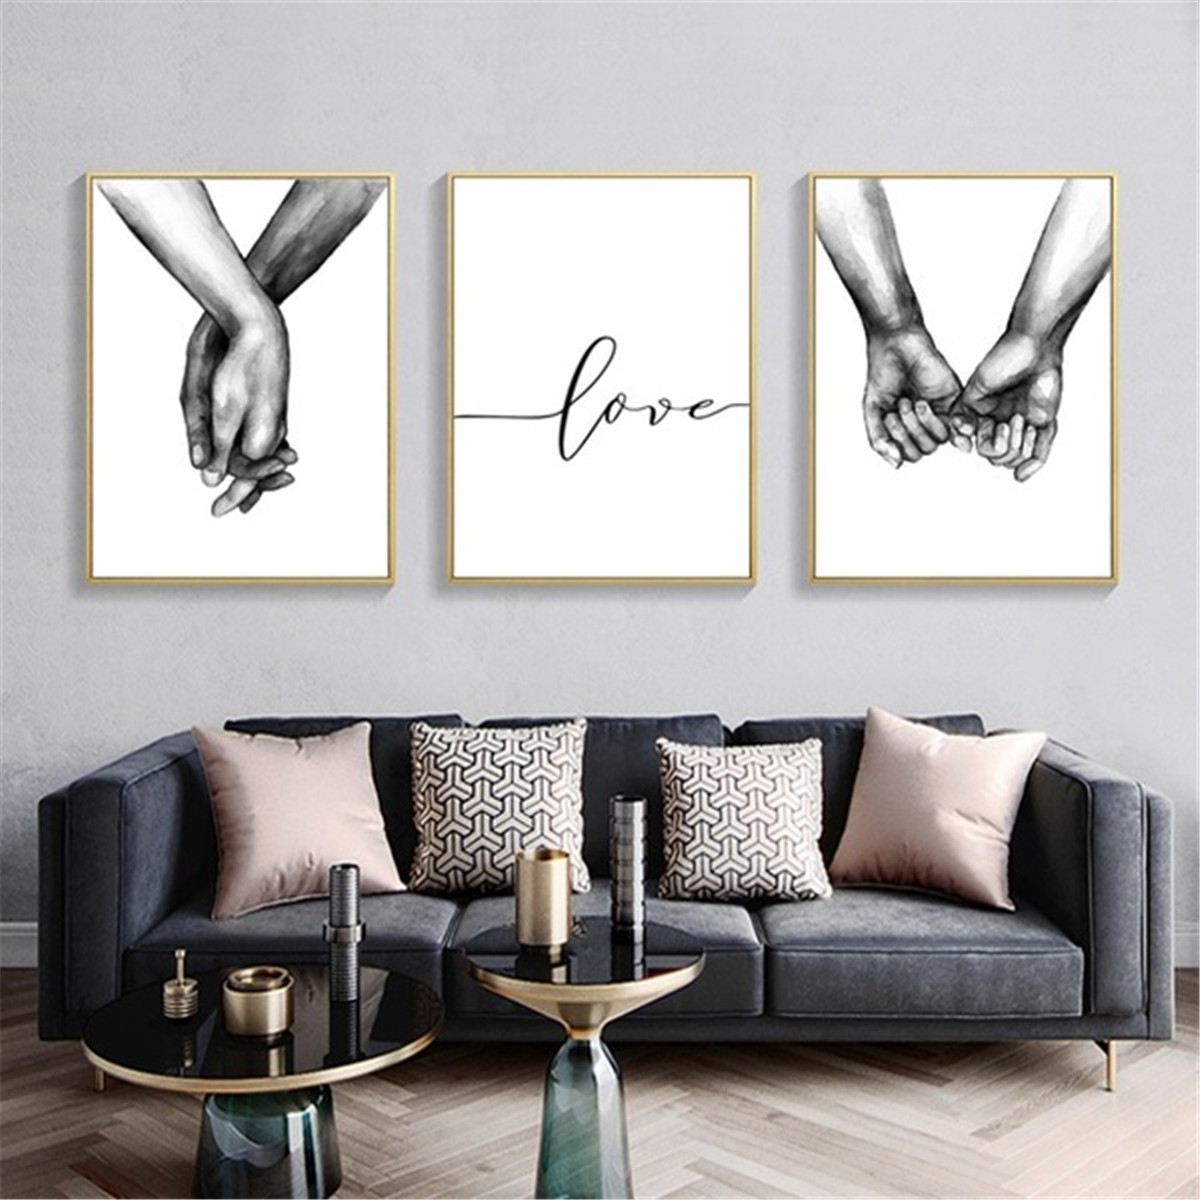 Holding-Hand-Black-And-White-Picture-Cambric-Prints-Painting-Love-Wall-Sticker-Home-Decor-1595537-2